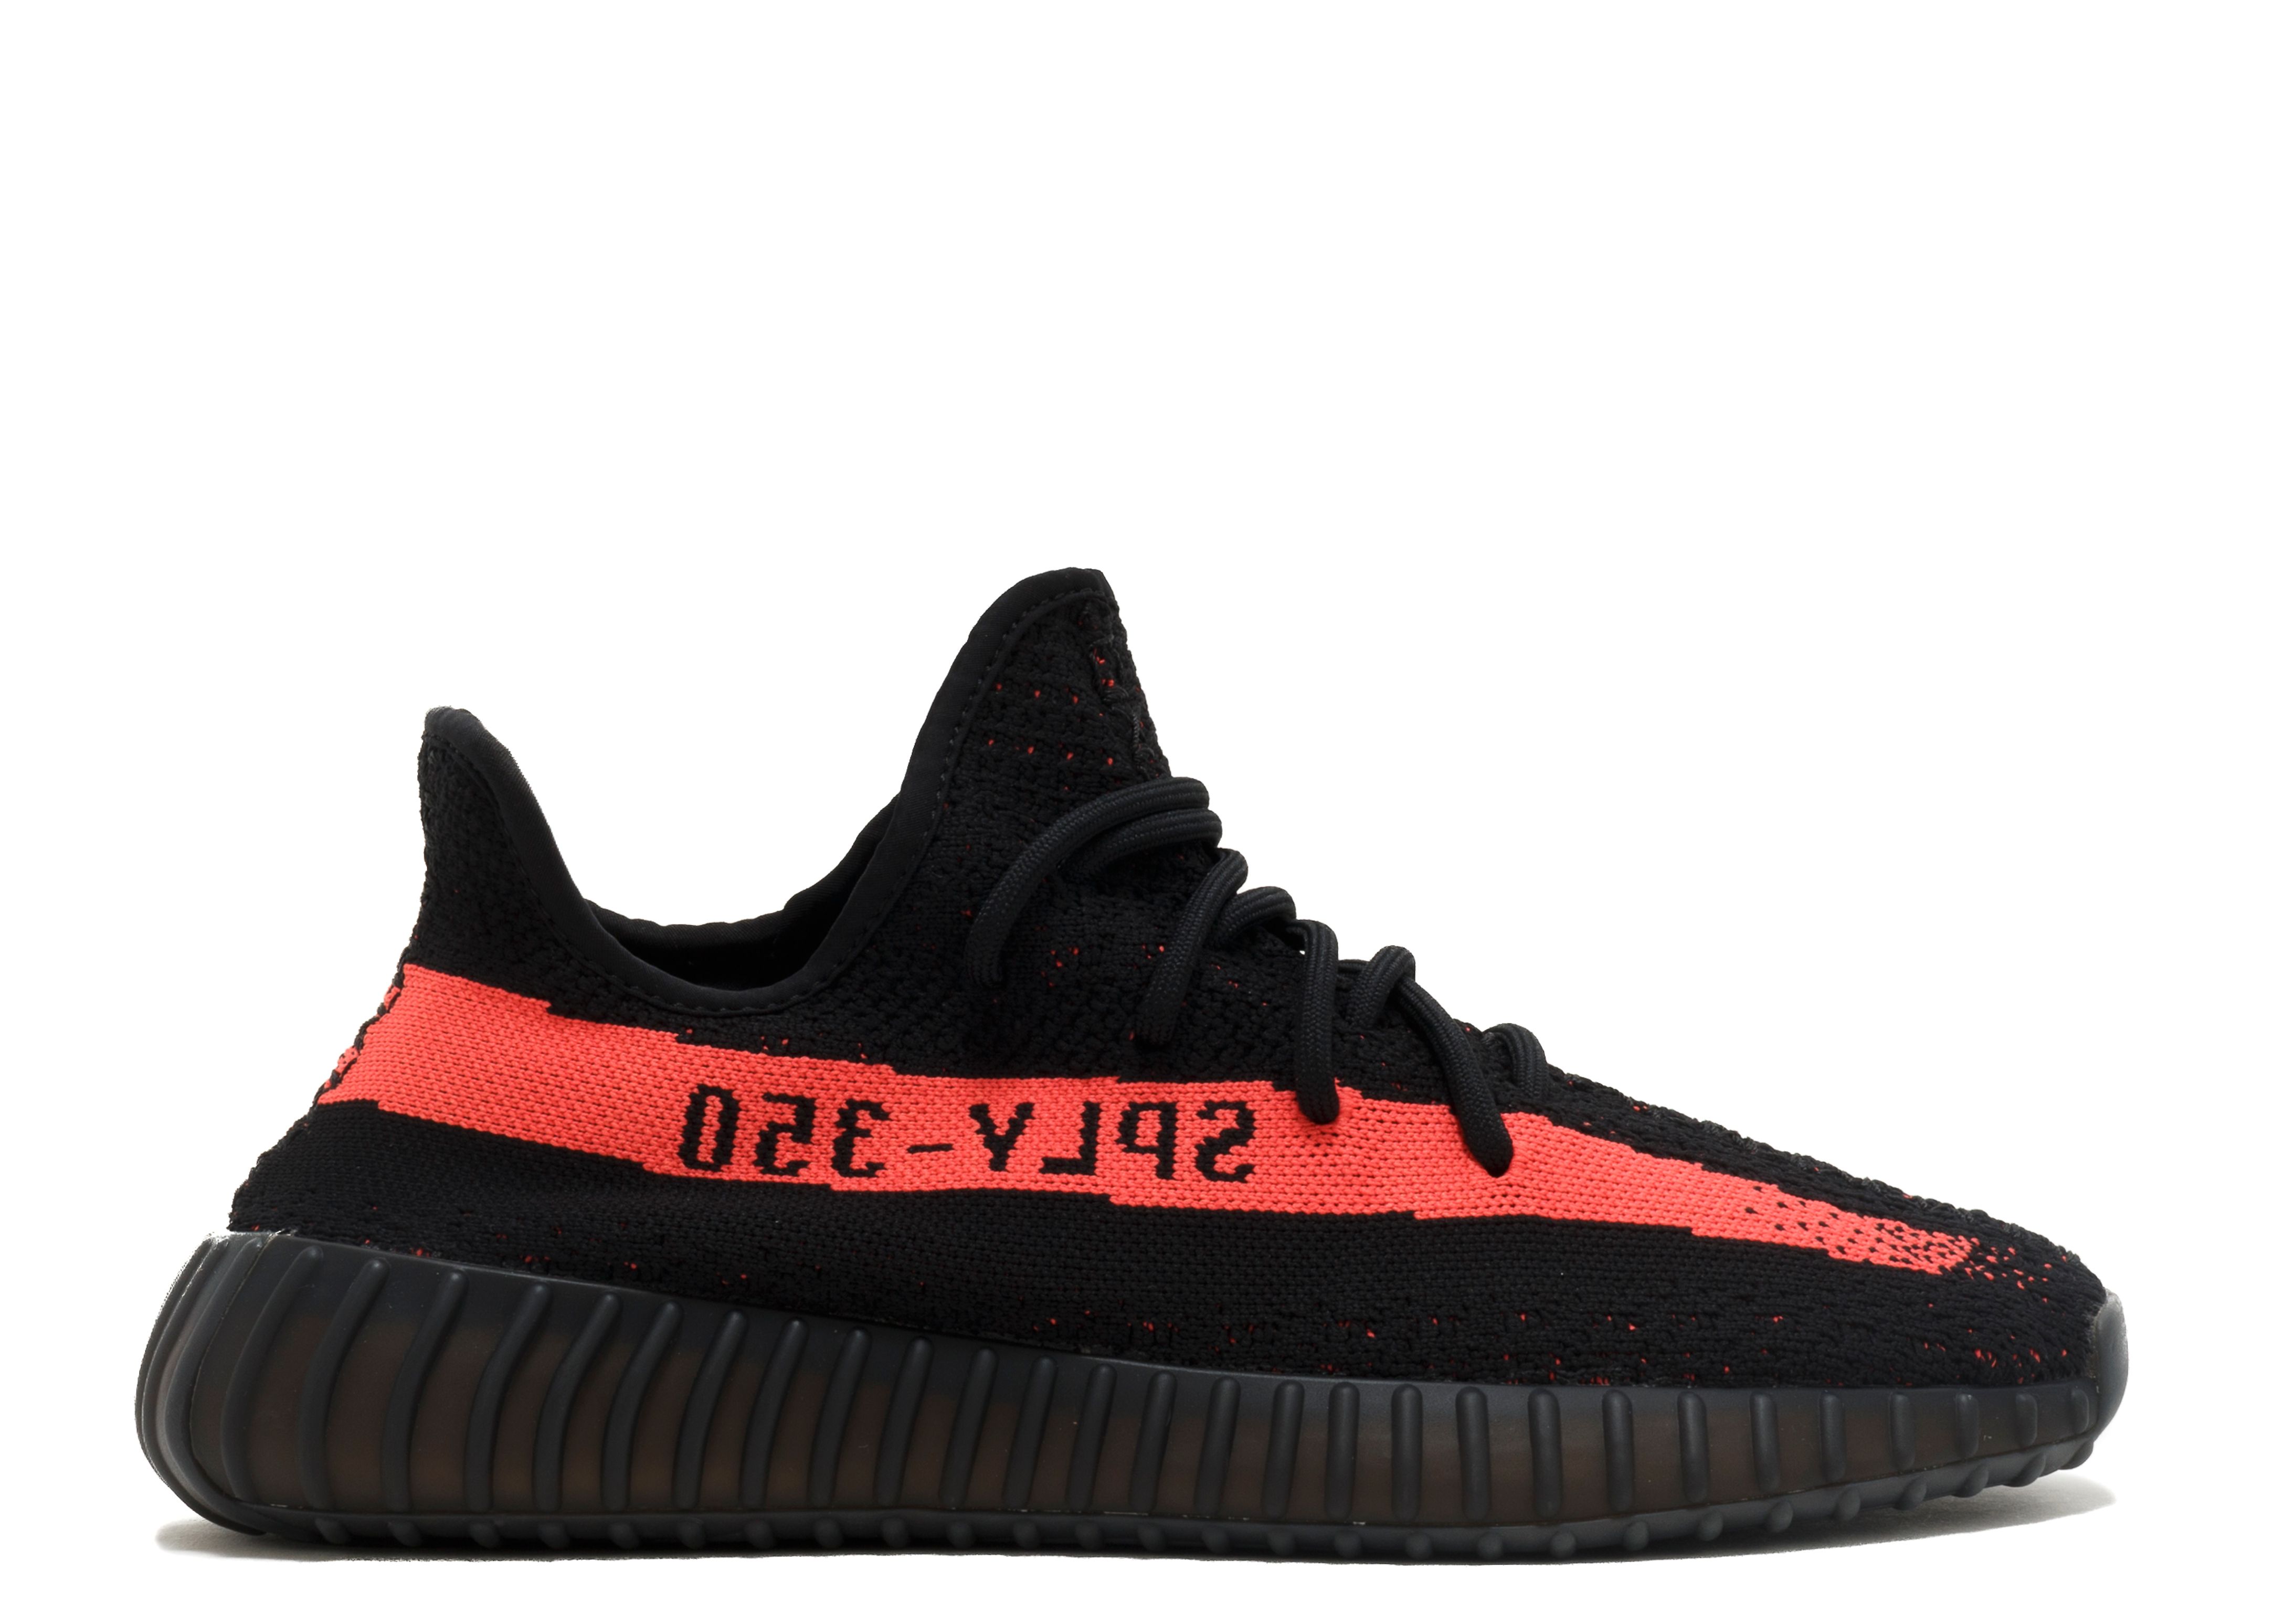 Kong Lear halvt kind Yeezy Boost 350 V2 'Red' - Adidas - BY9612 - core black/red/core black |  Flight Club